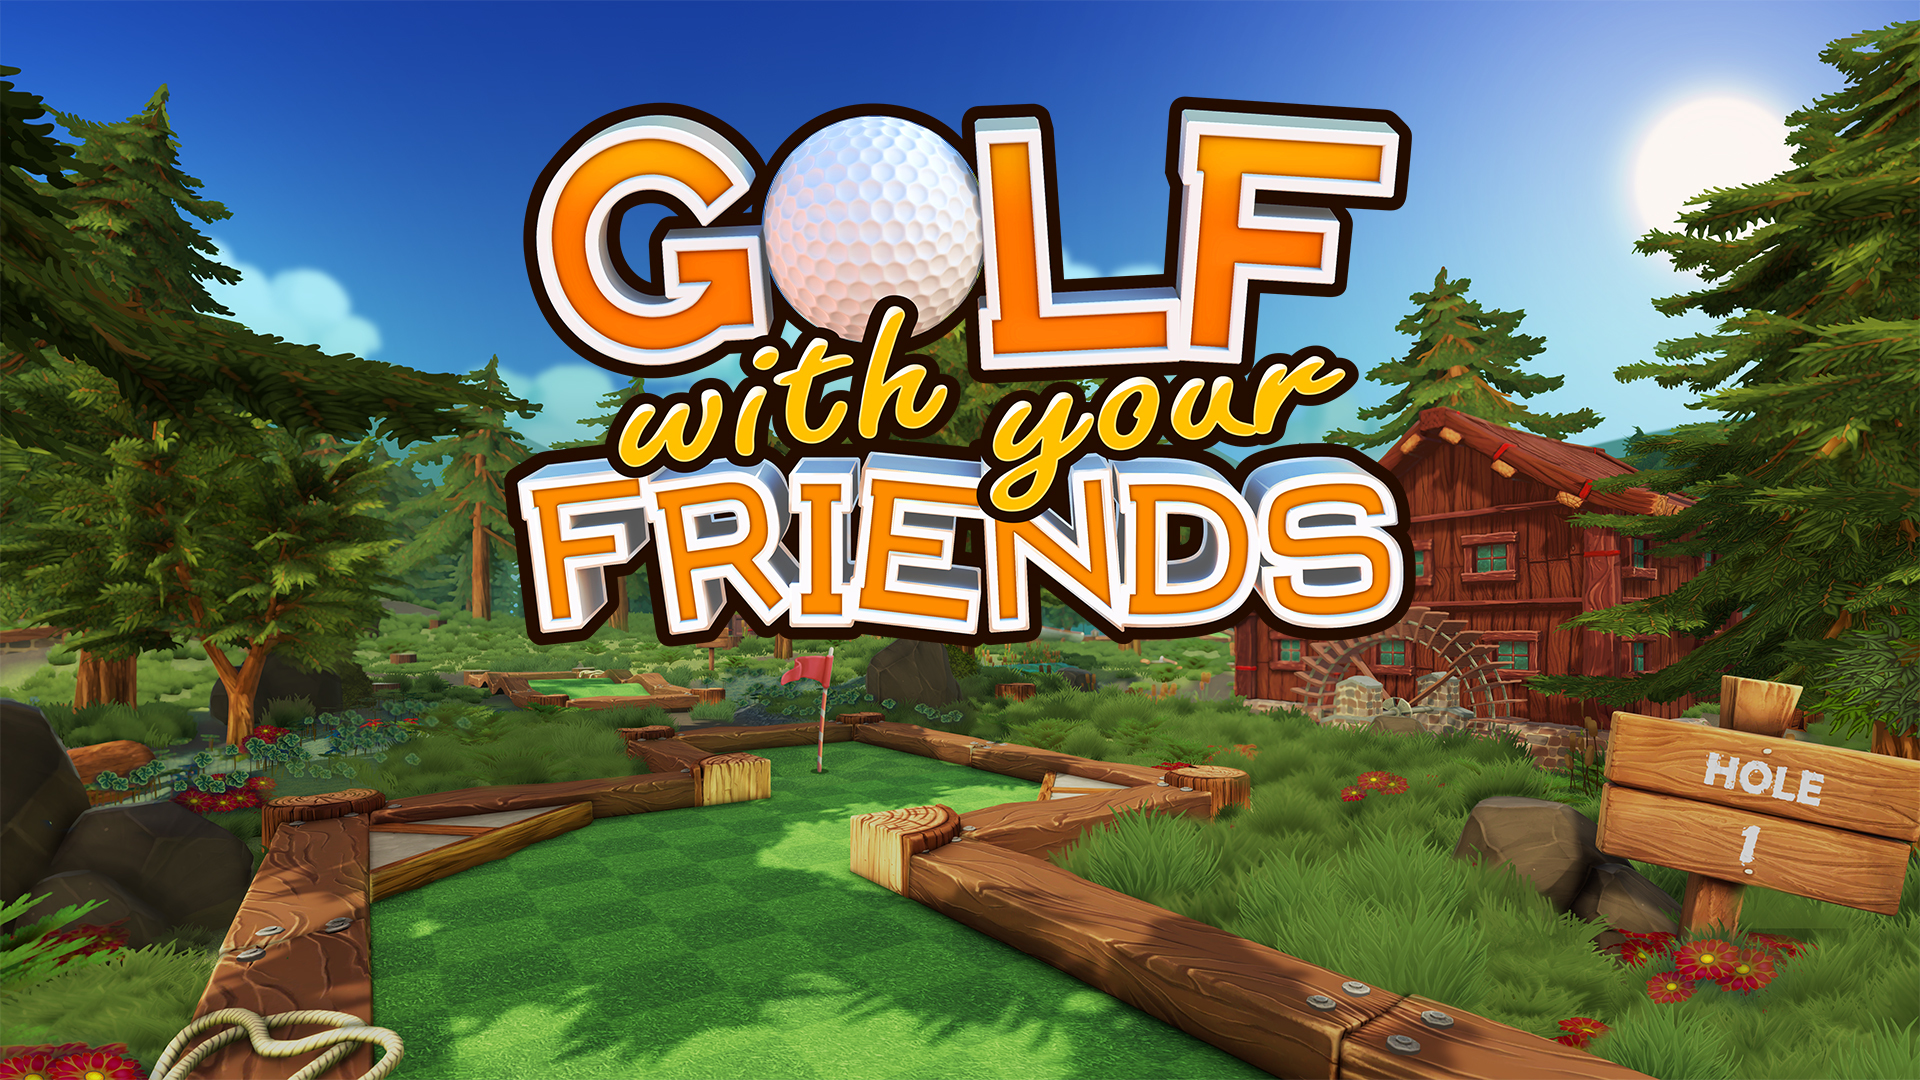 computer golf games for mac